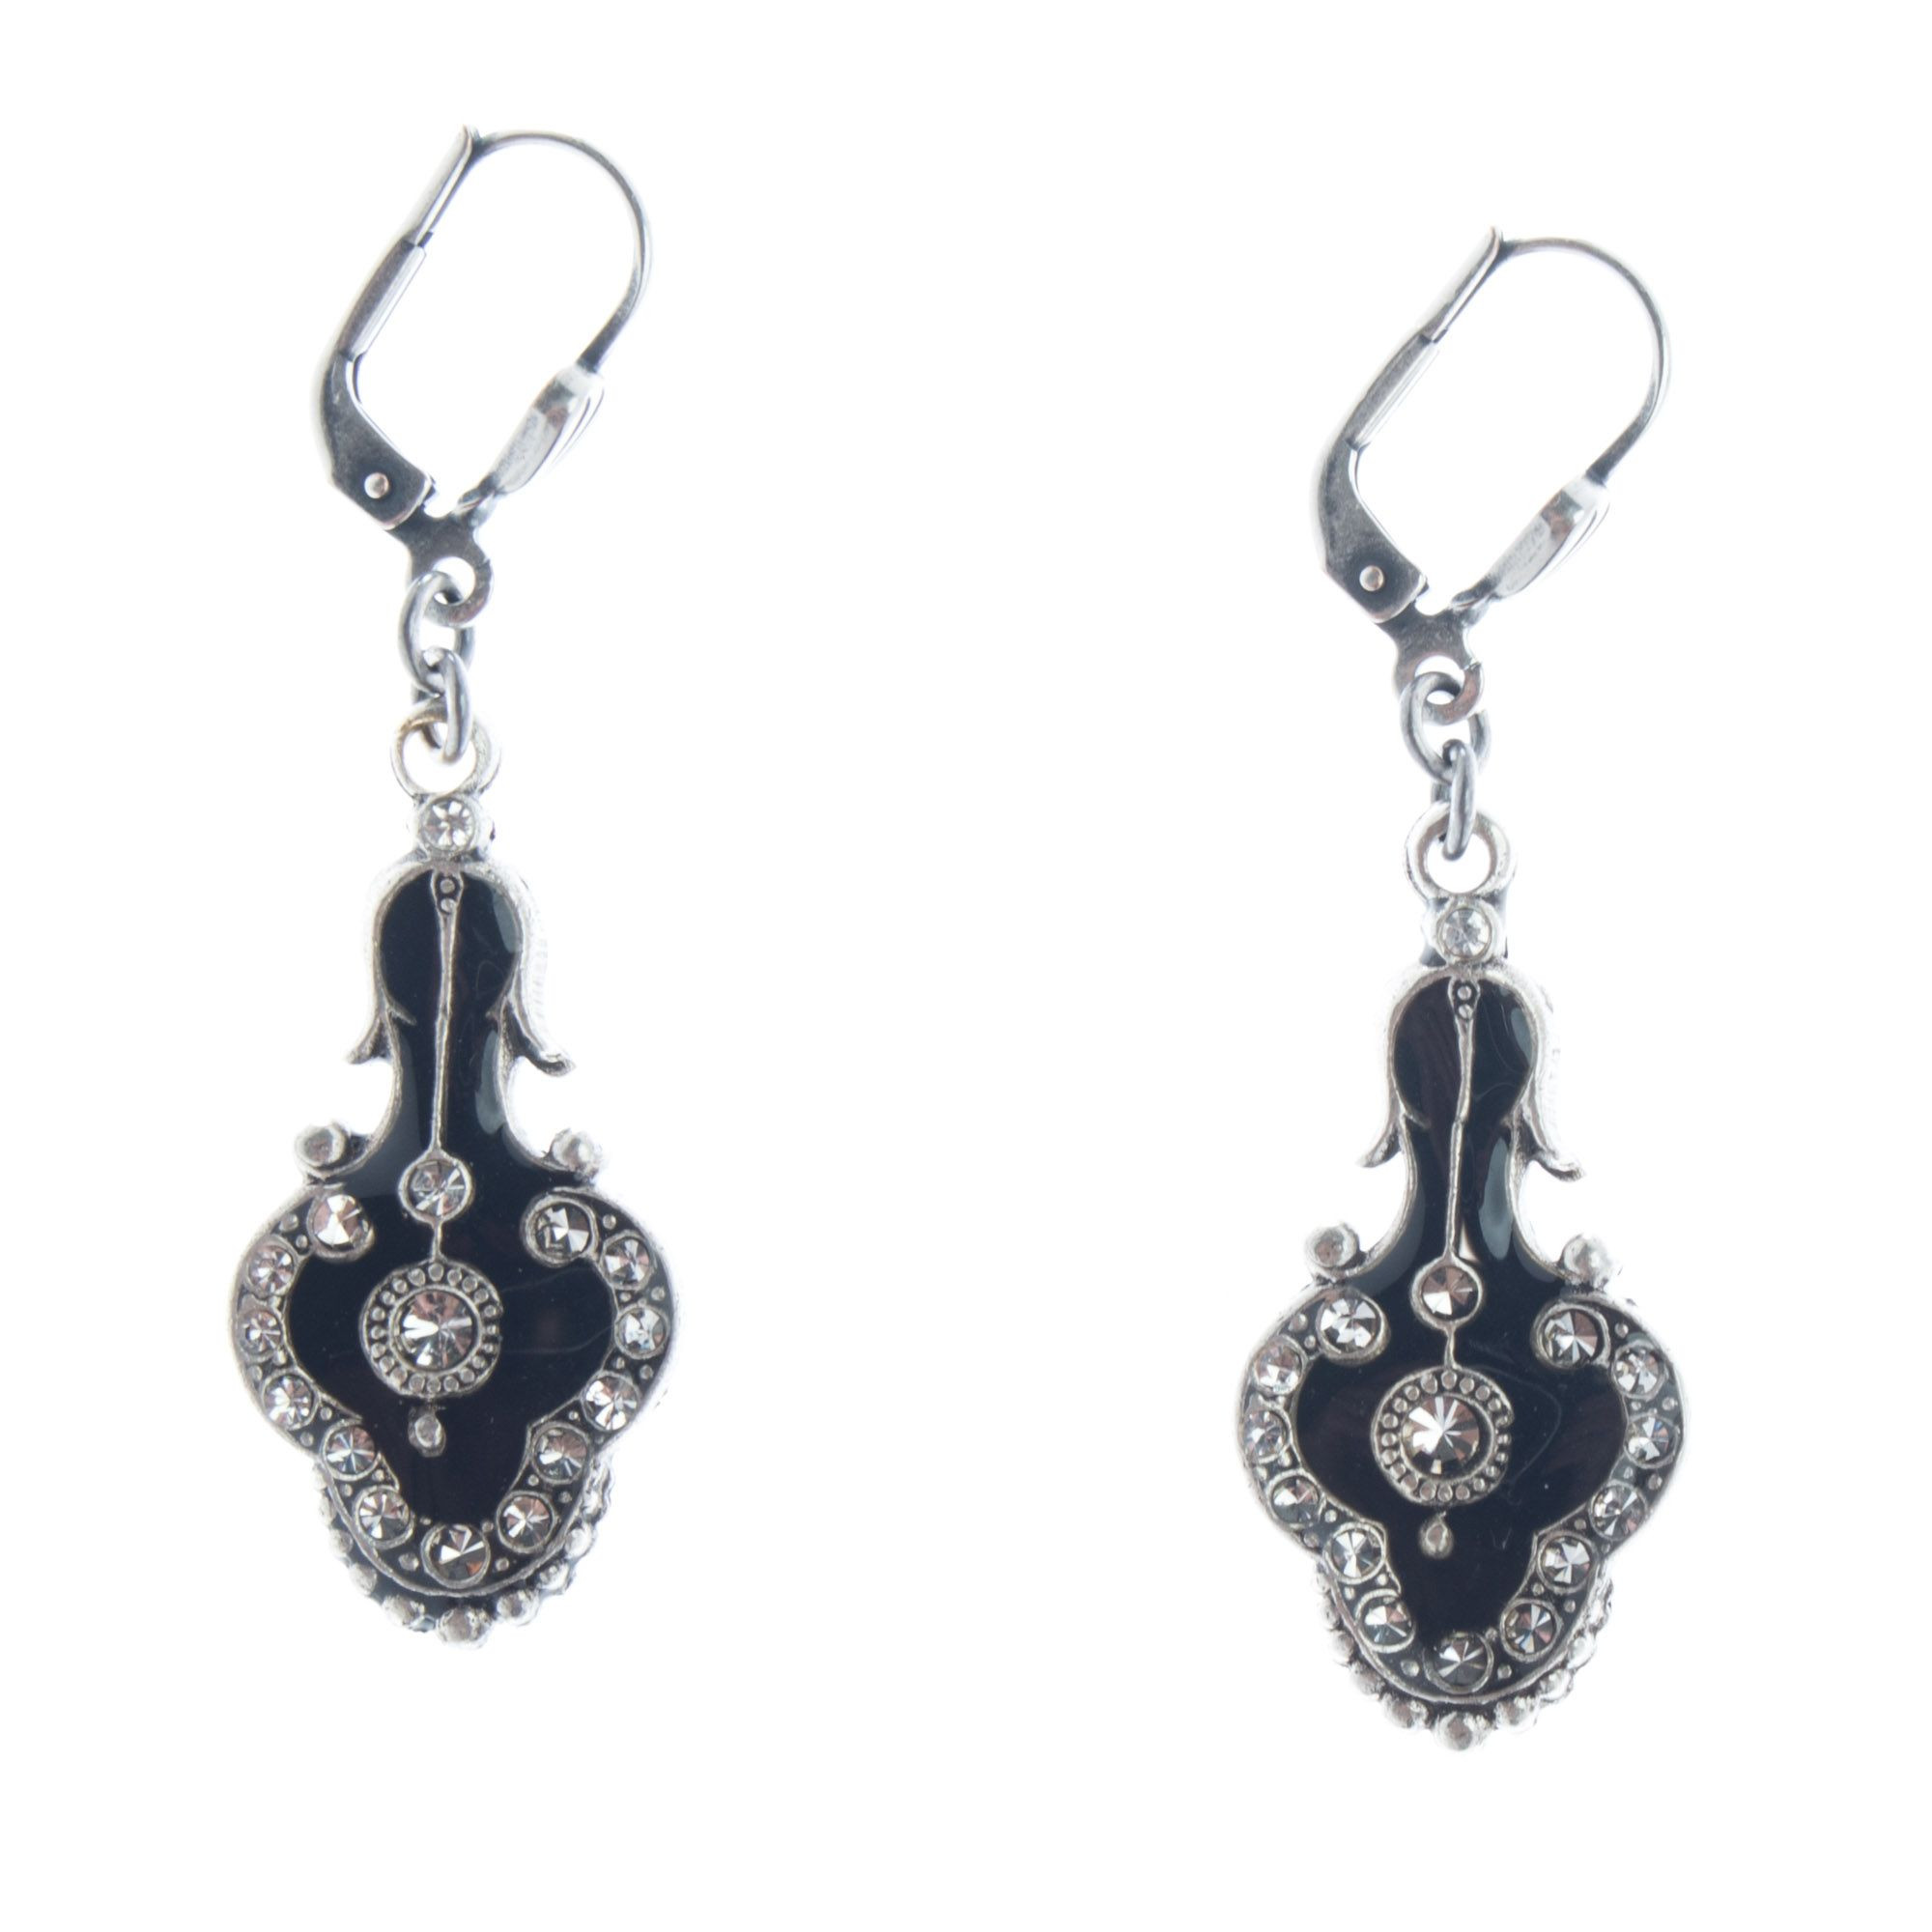 Catherine Popesco Earrings
 Catherine Popesco Limited Edition Silver Black French